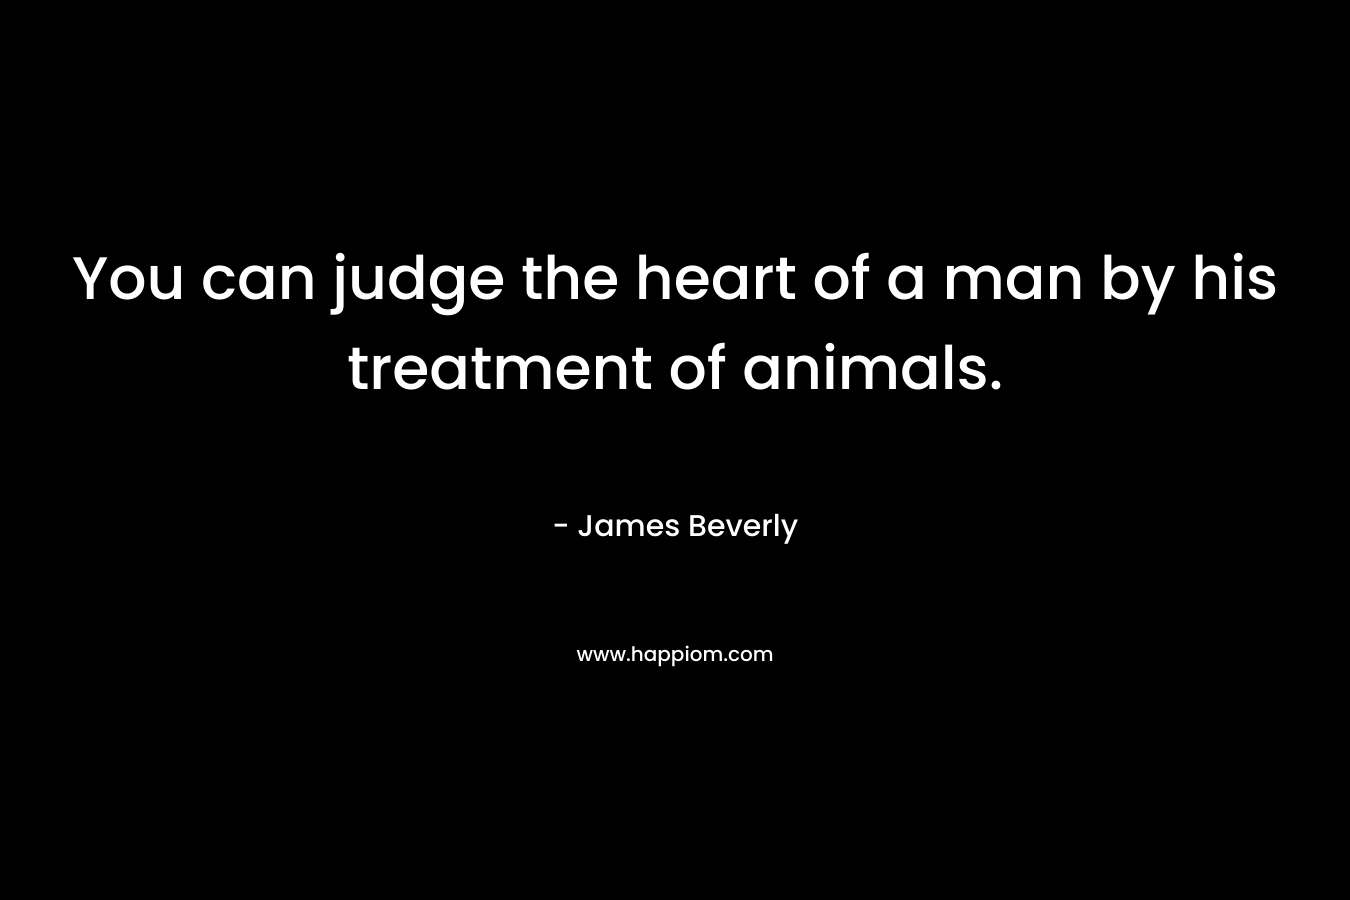 You can judge the heart of a man by his treatment of animals. – James Beverly